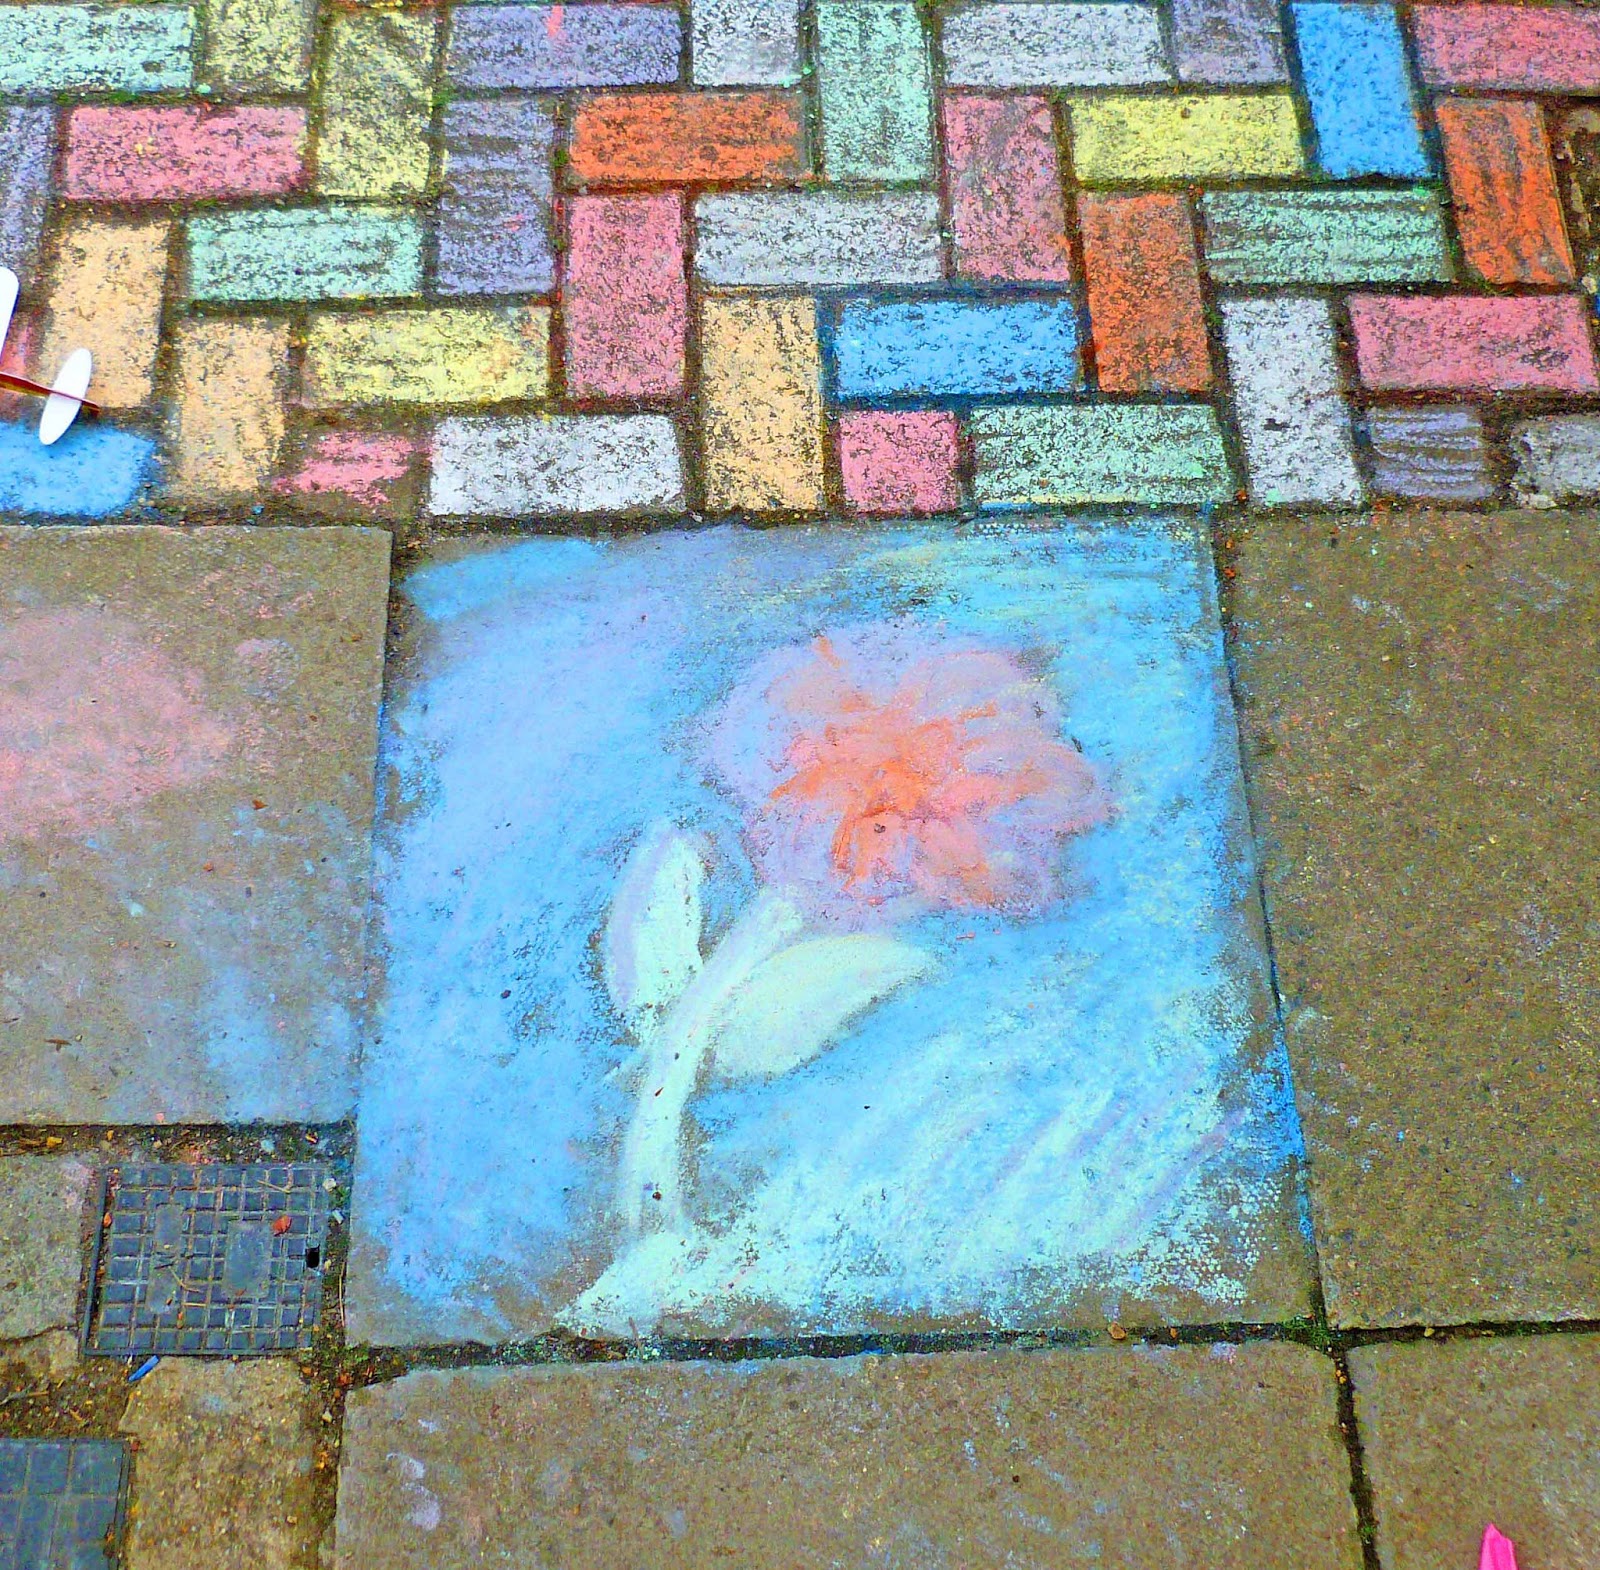 Photo of a mauve and coral flower chalked onto a pavement